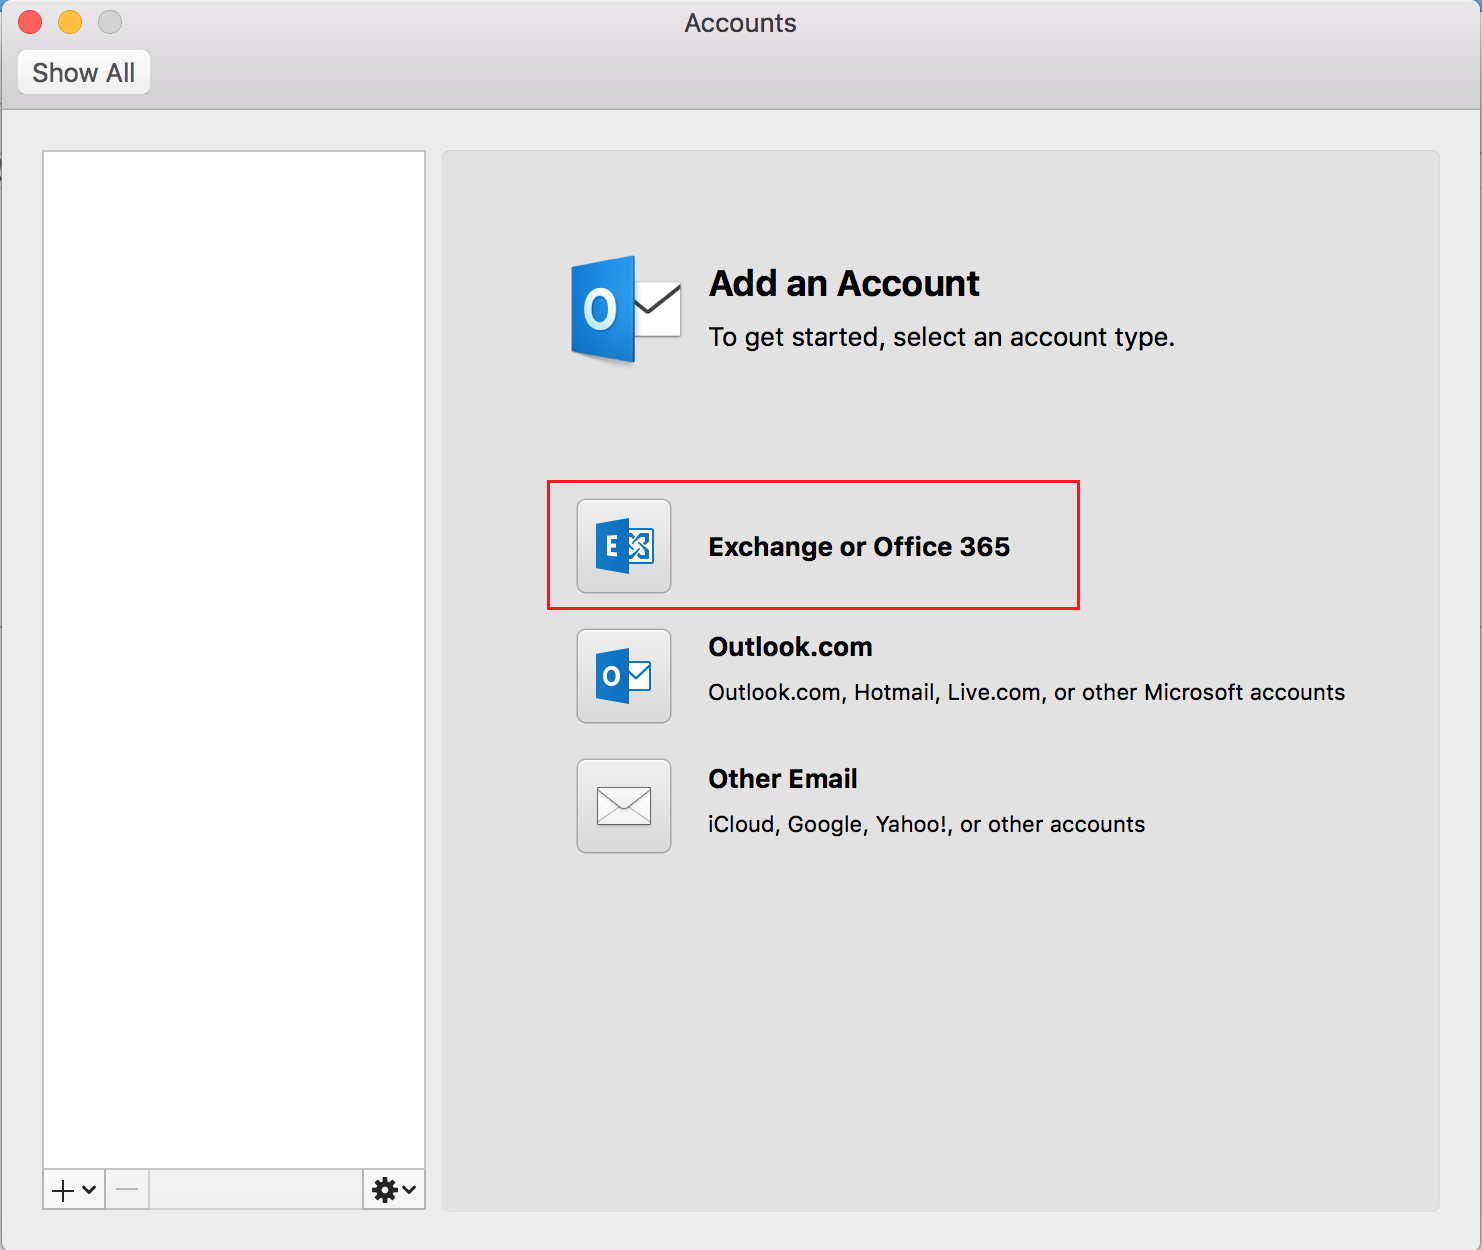 Accounts window with Exchange or Office 365 option circled